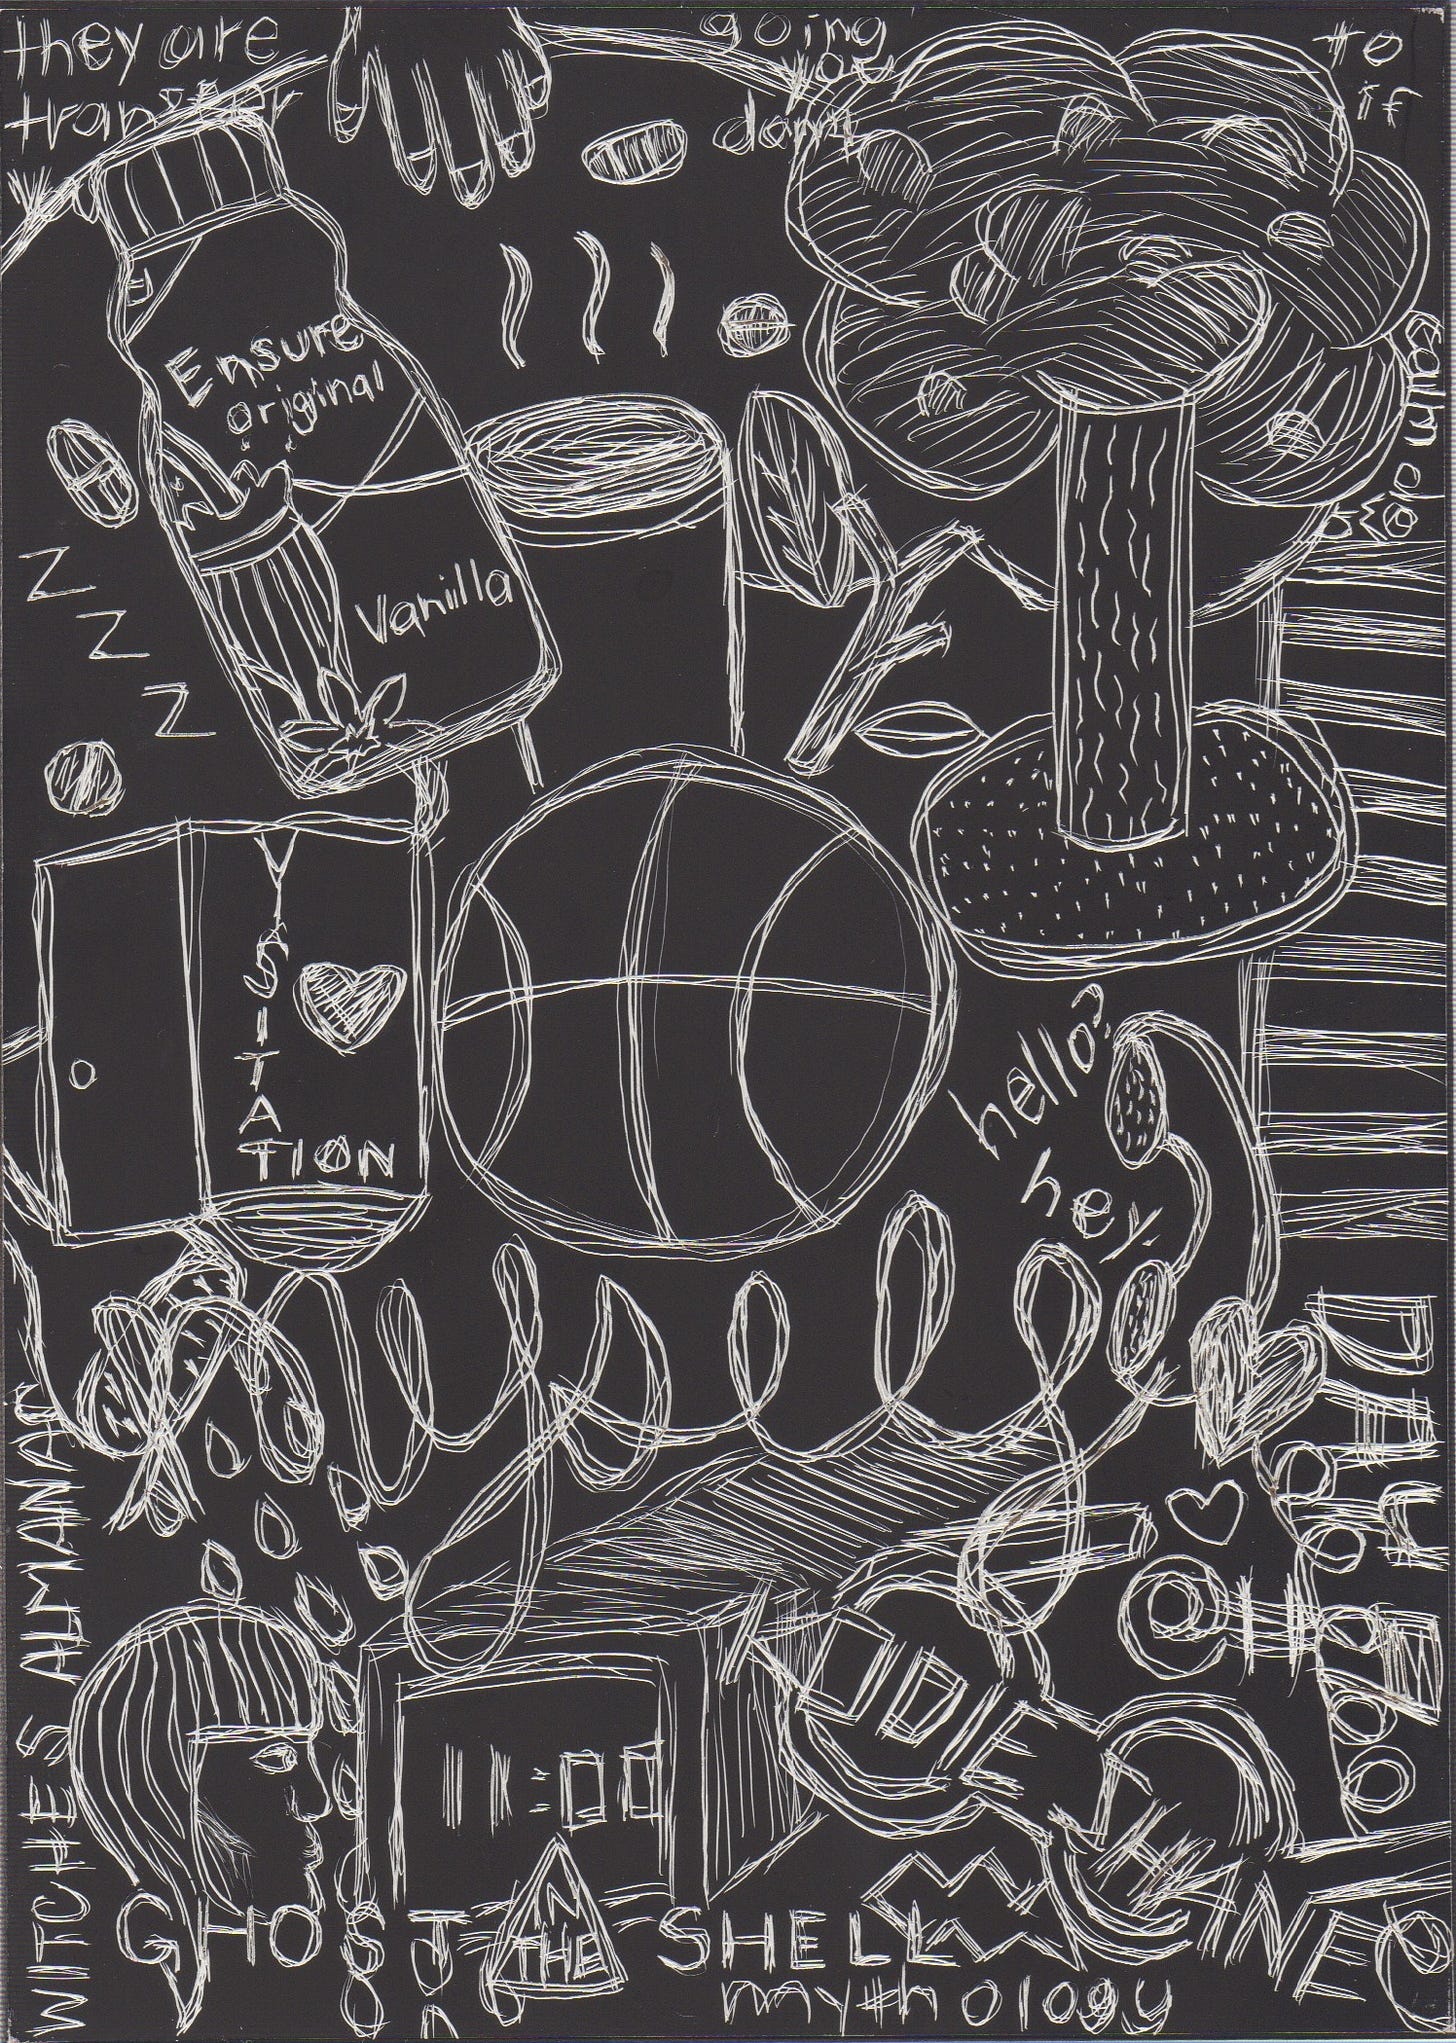 A black scratch board with lots of jumbled images sketched into it including a tree, basketball, the word "myself", a bottle of Ensure, and pills.